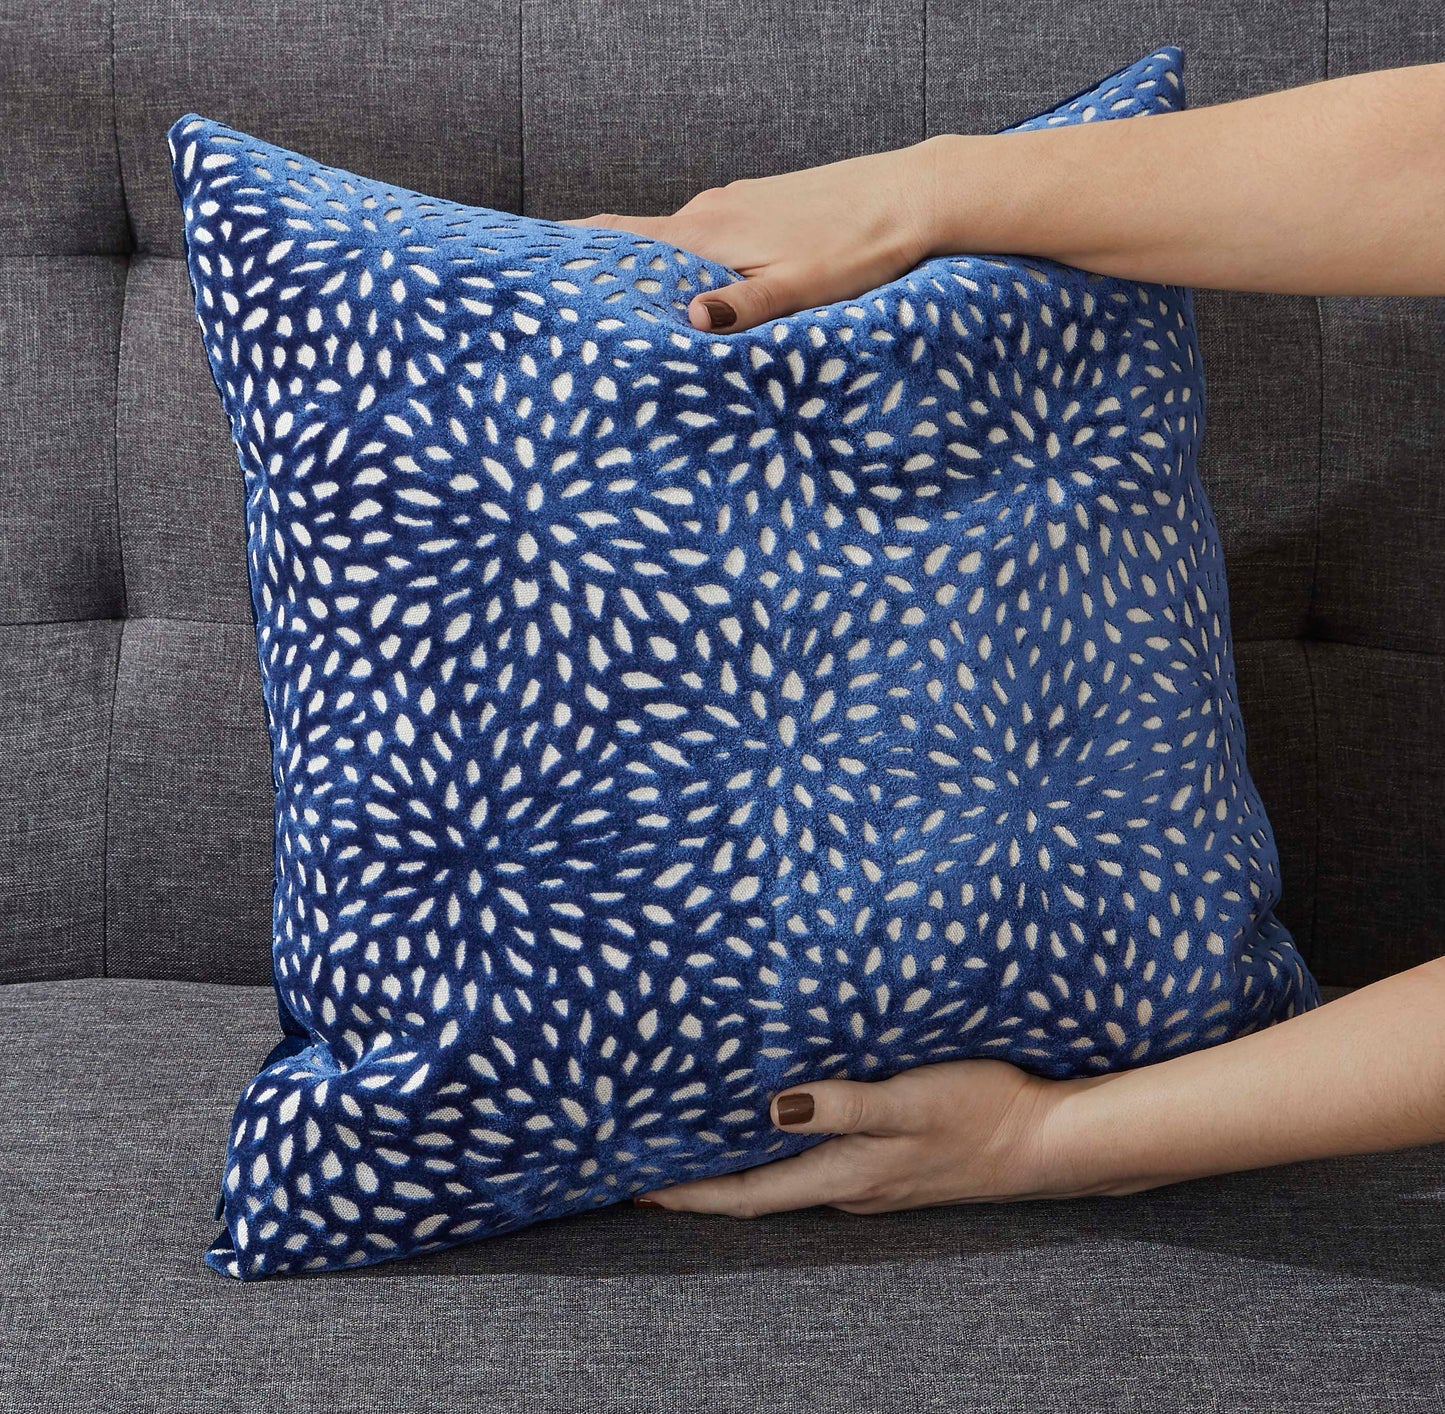 Feather Filled Throw Pillow blue 20x20 inches Single Pillow